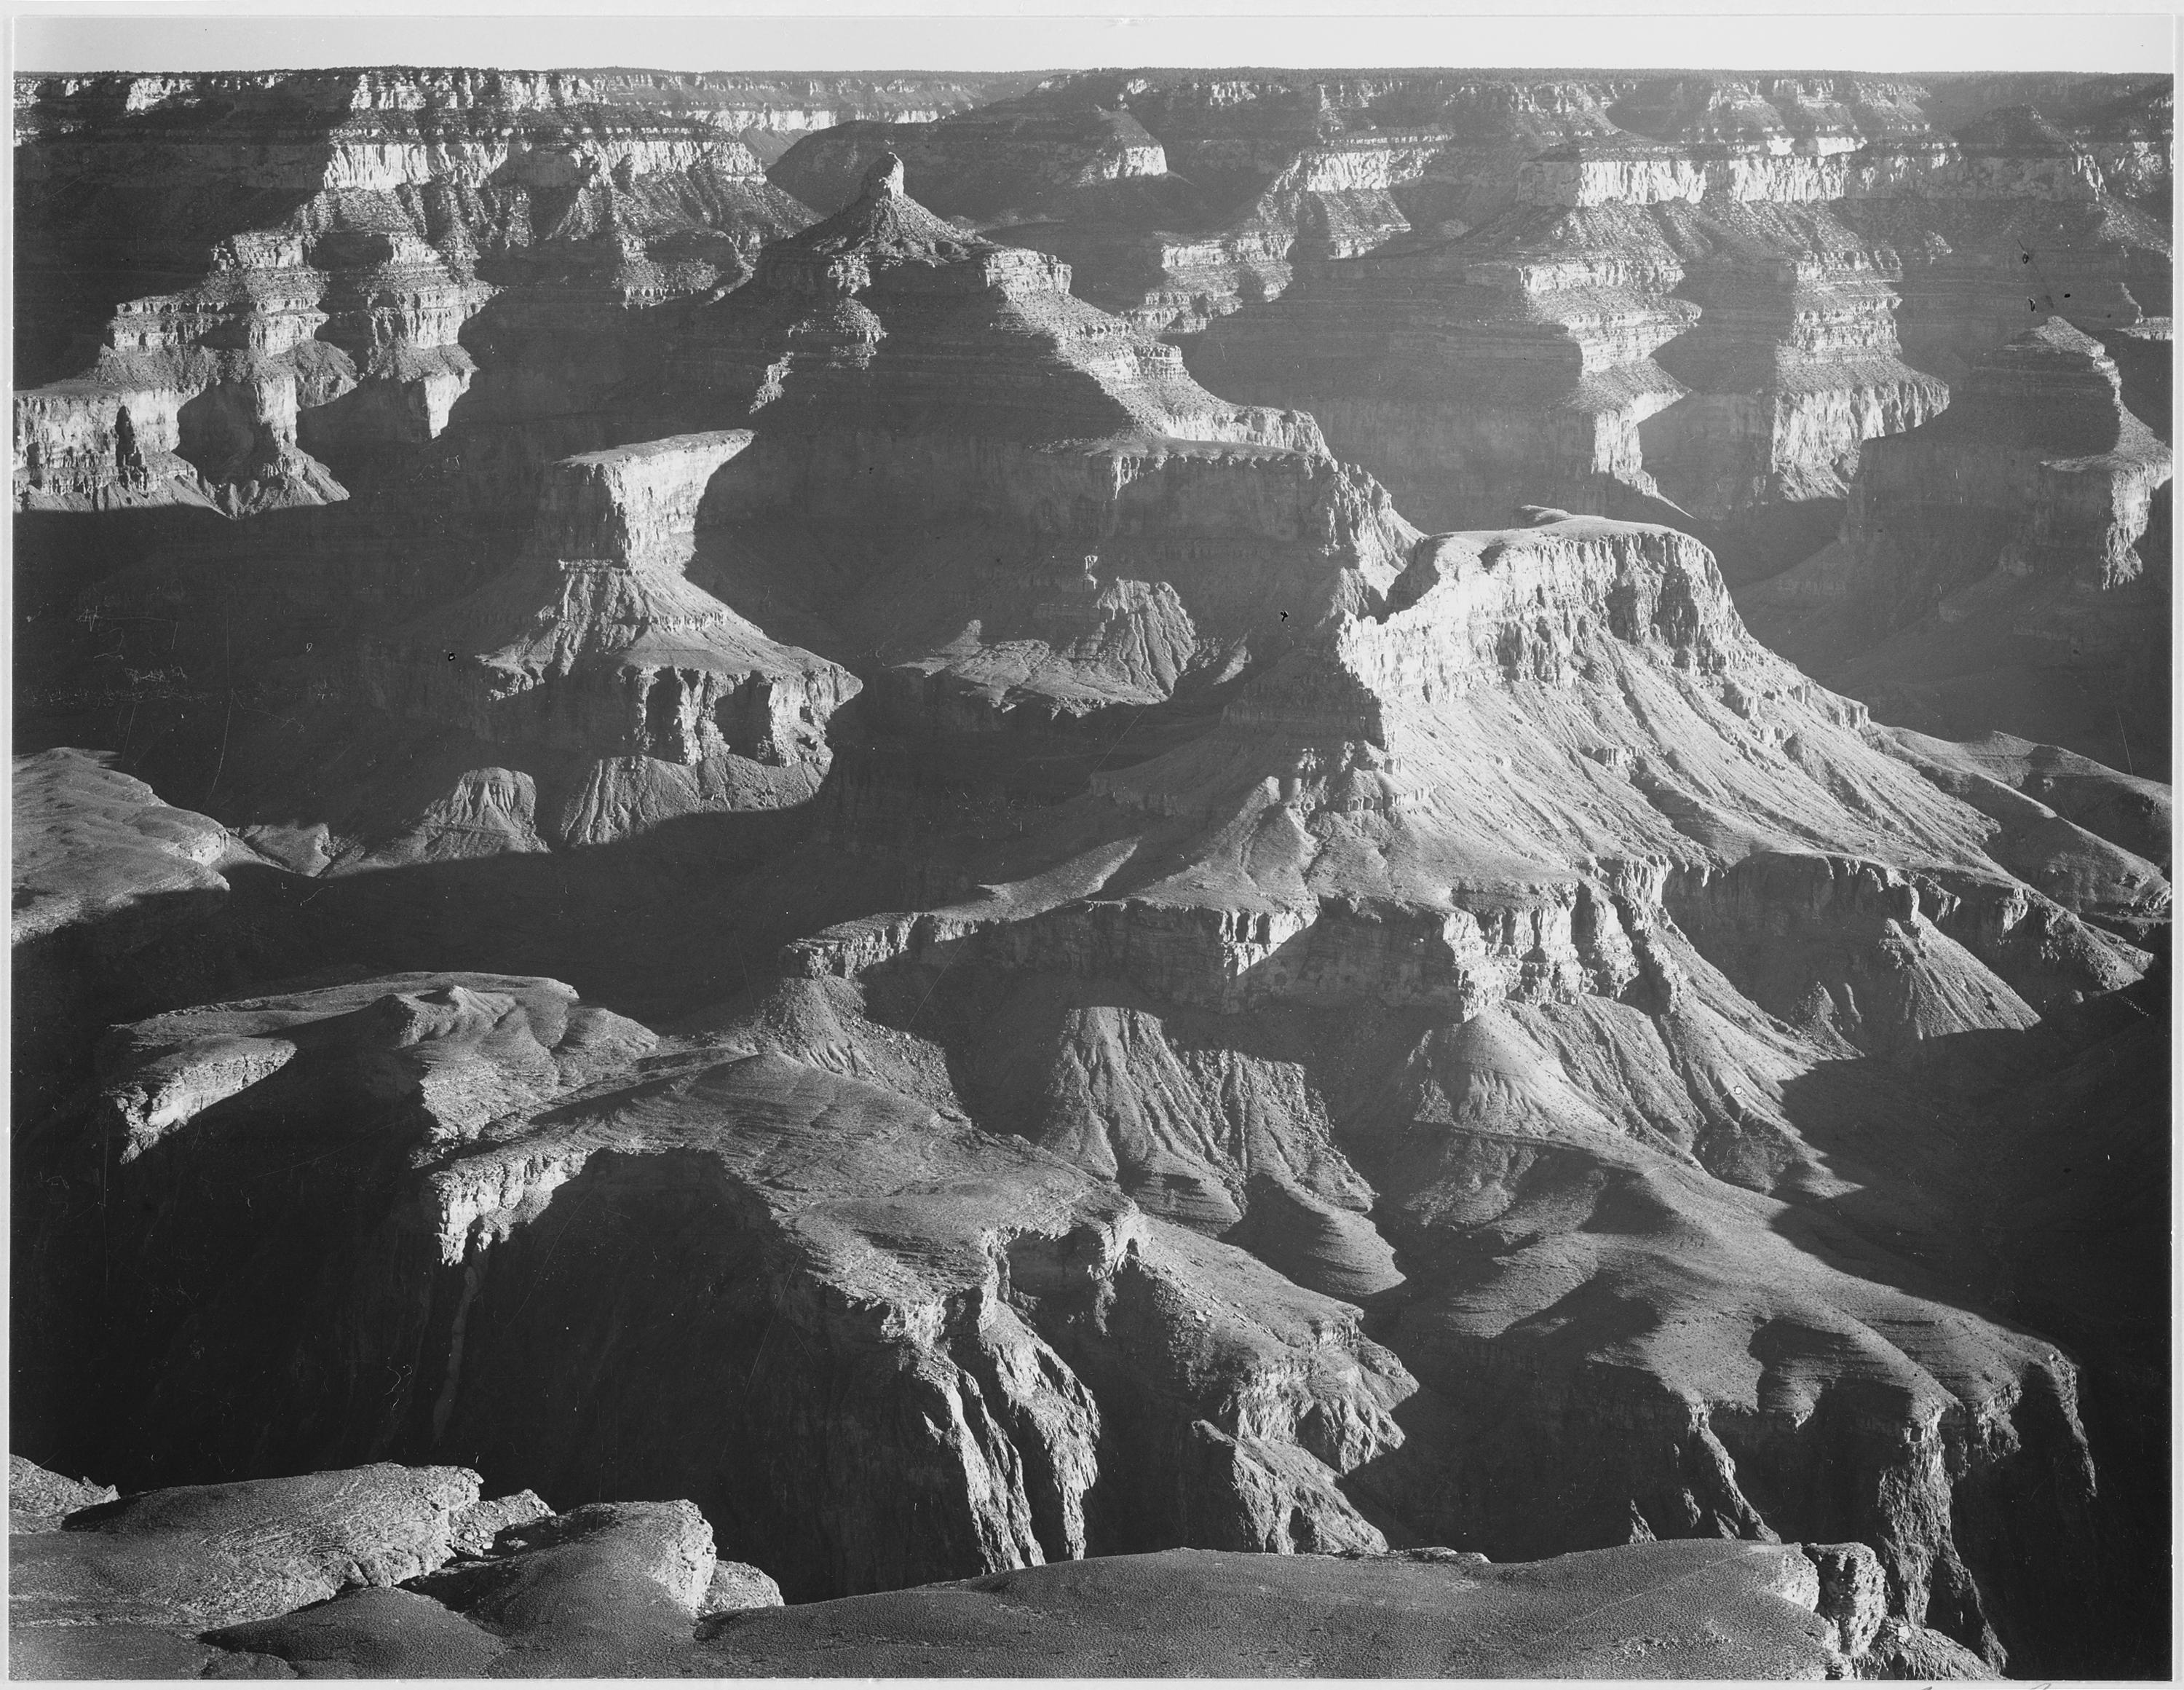 Ansel Adams - National Archives 79-AA-F27